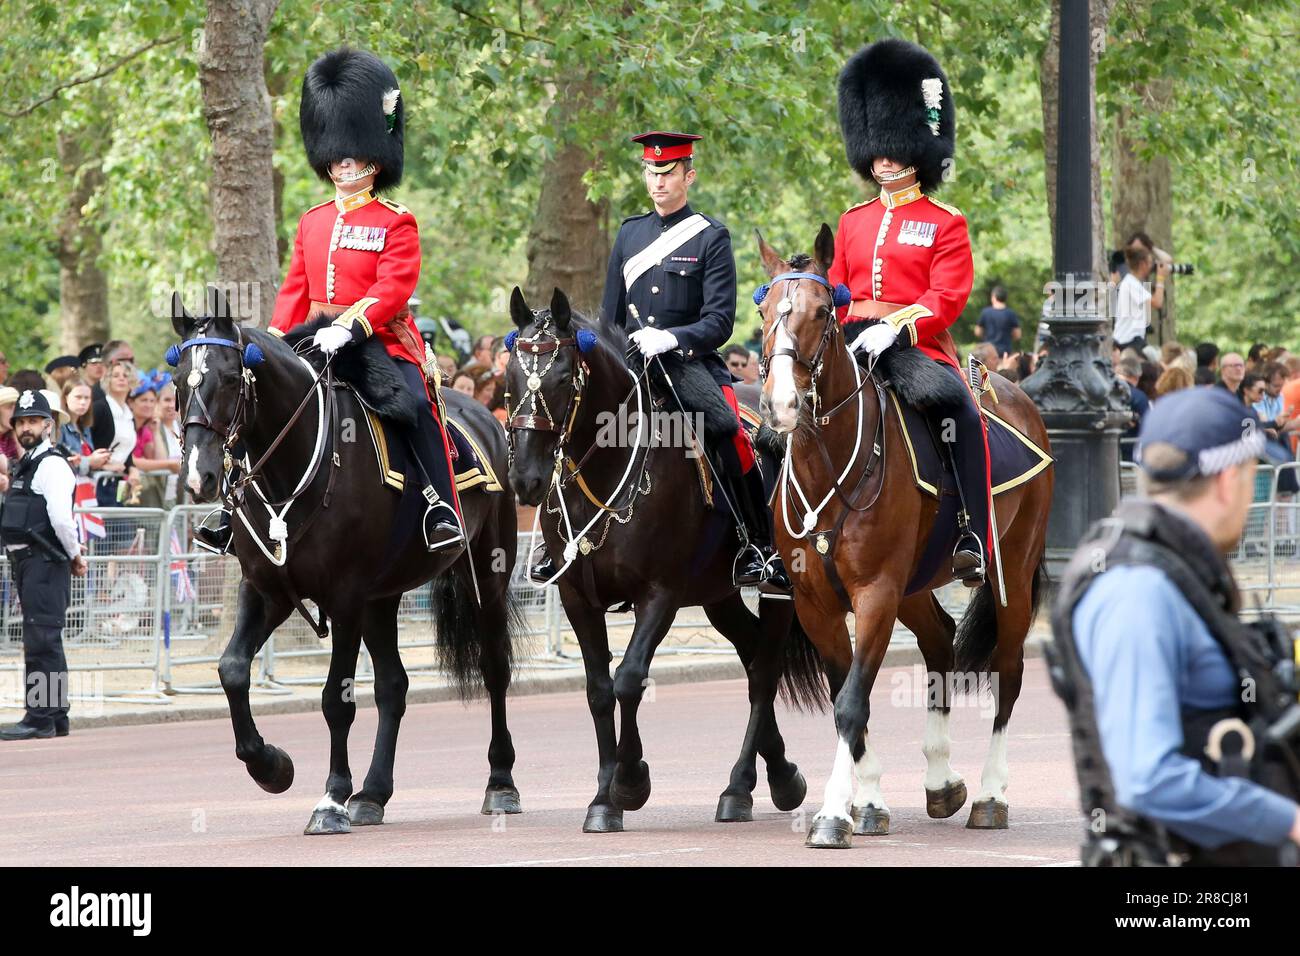 London, UK. 17th June, 2023. Soldiers on horseback seen along The Mall in central London, during the Trooping the Colour parade. The parade is held to mark the official birthday of King Charles III. This year will be the first Trooping the Colour held for King Charles III since he ascended to the throne following the death of Queen Elizabeth II on 8 September 2022. (Photo by Steve Taylor/SOPA Images/Sipa USA) Credit: Sipa USA/Alamy Live News Stock Photo